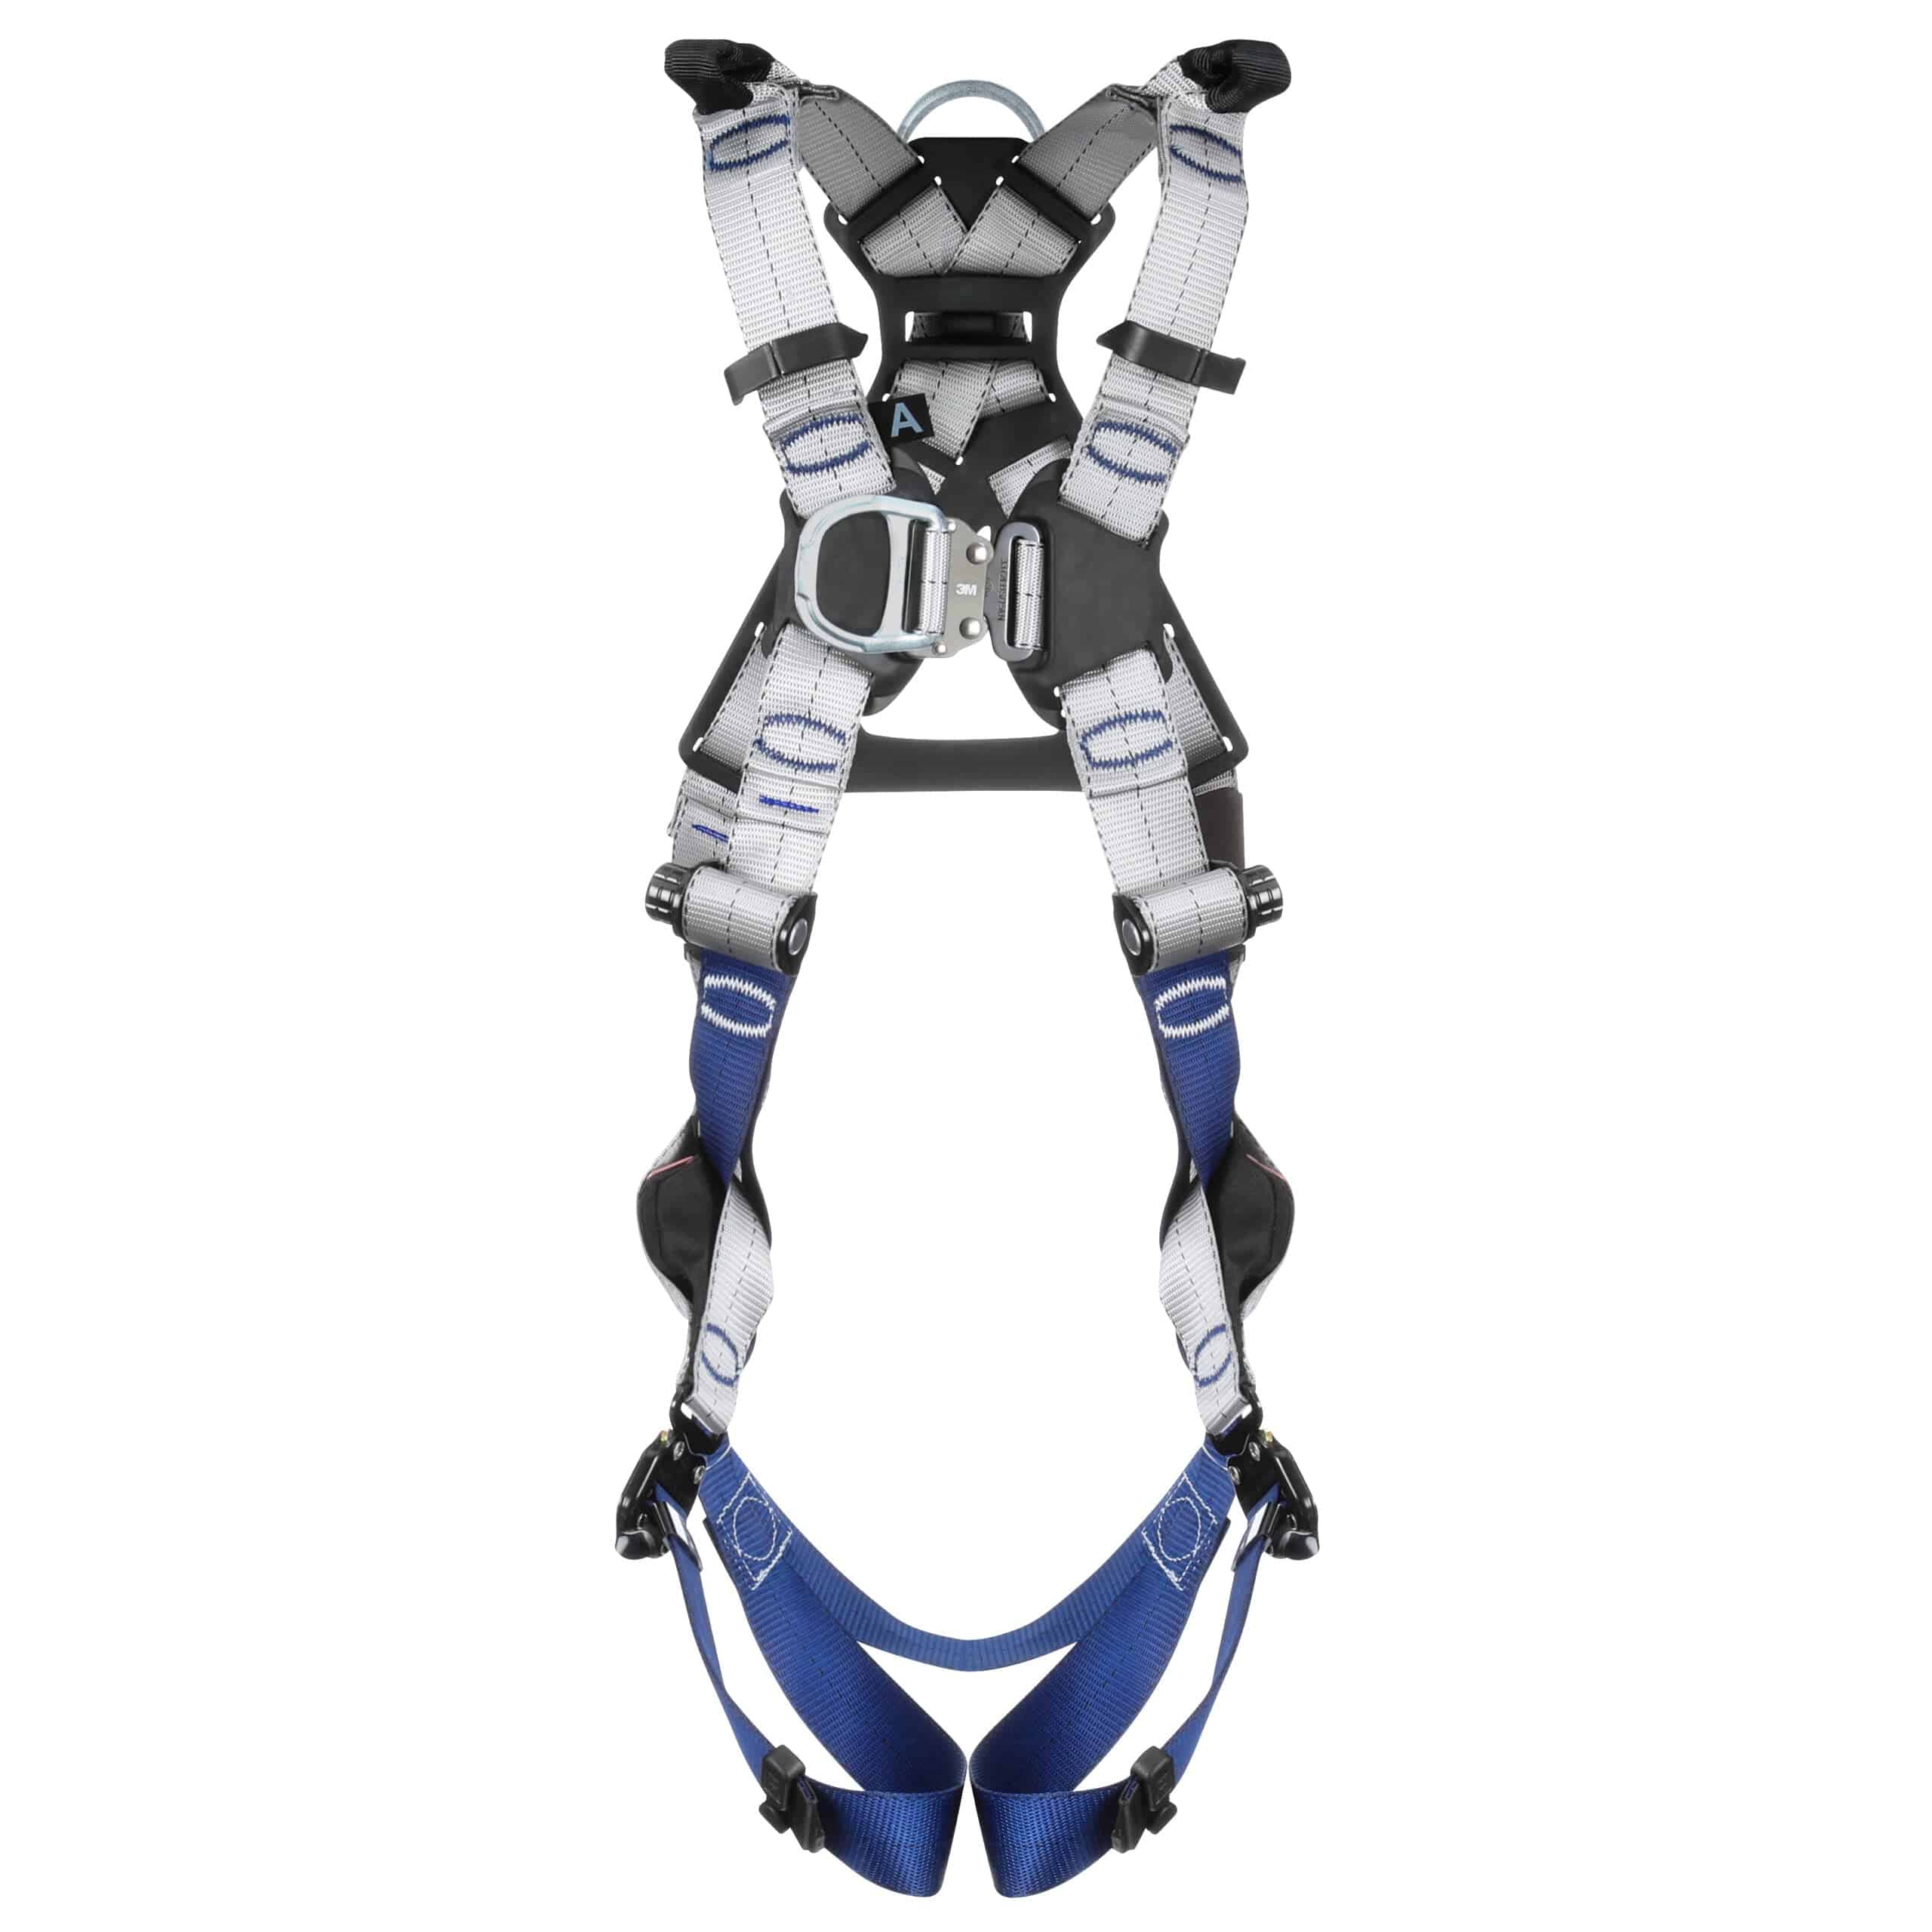 3M DBI SALA ExoFit XE50 Quick Connect Rescue Safety Harness - SecureHeights